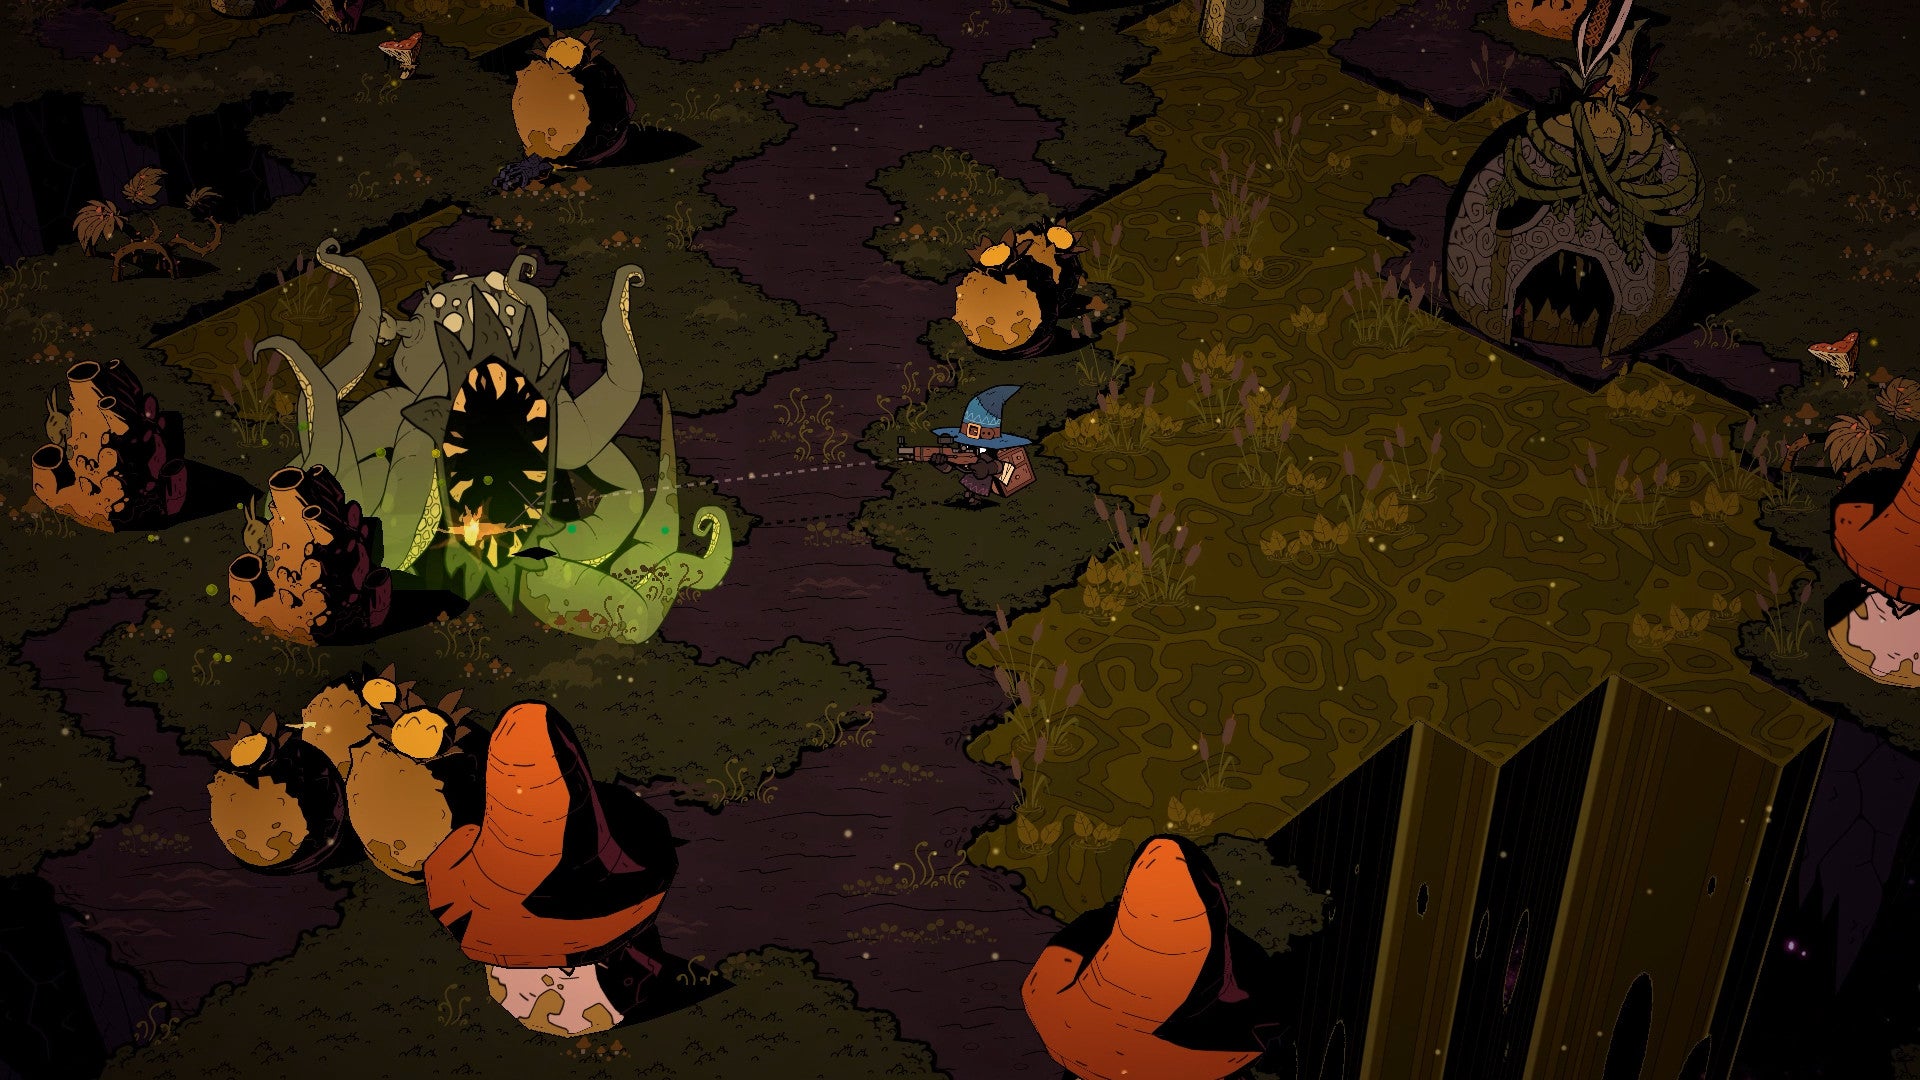 A screenshot of Wizard With A Gun showing a grimy grass biome in which a wizard hat-wearing figure with a gun is taking aim at a green tentacle monster.